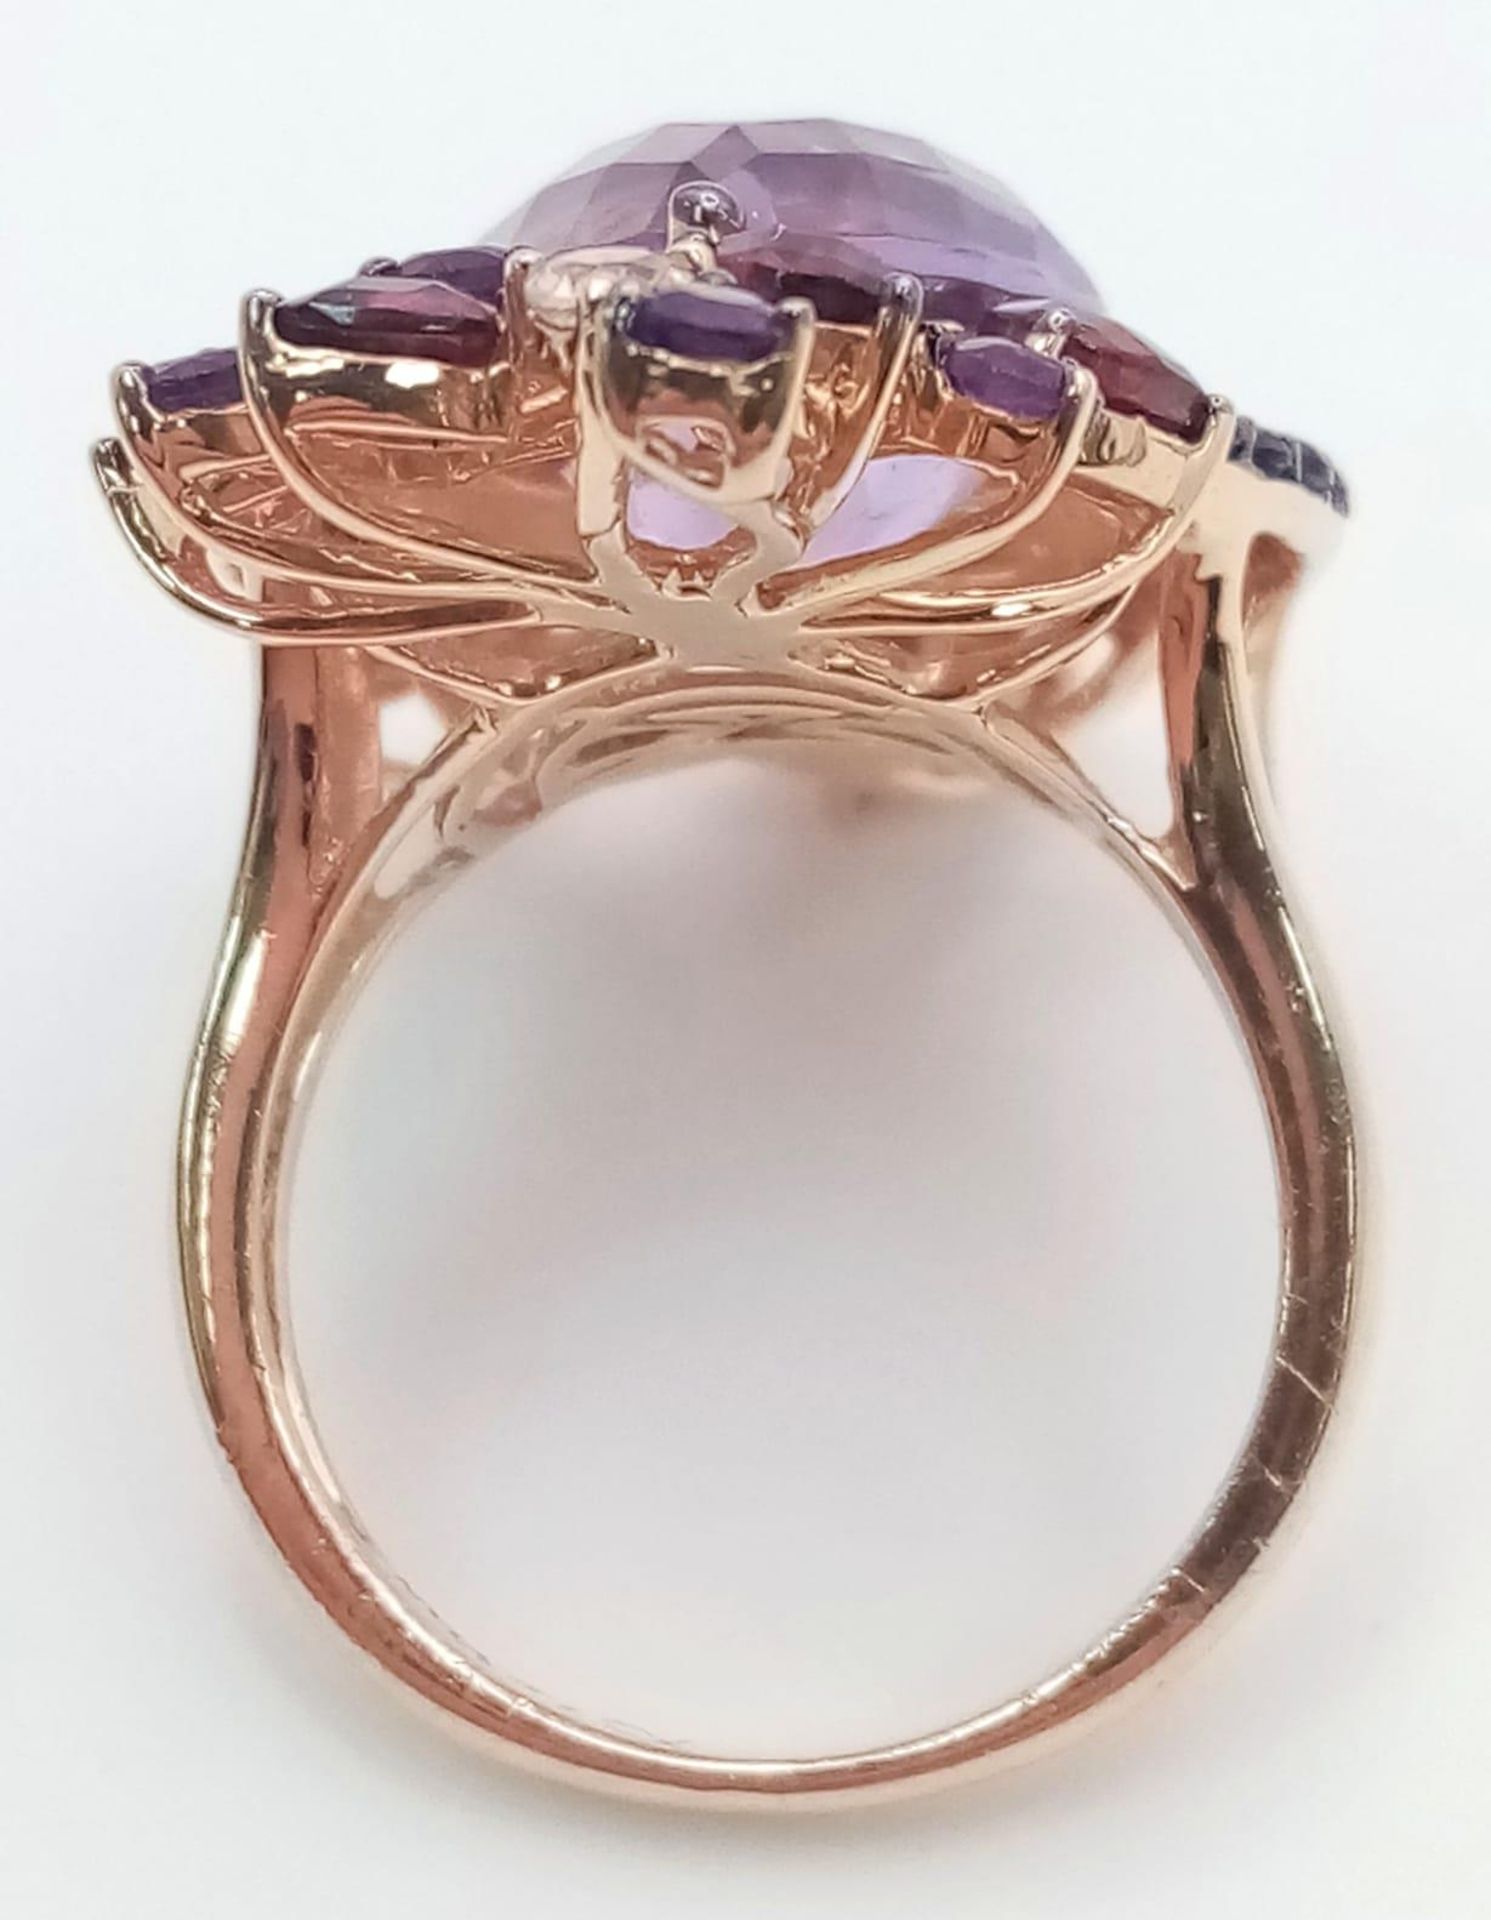 A stunning LE VIAN design, 14 K rose gold ring and earrings set with large pear shaped amethysts and - Image 10 of 11